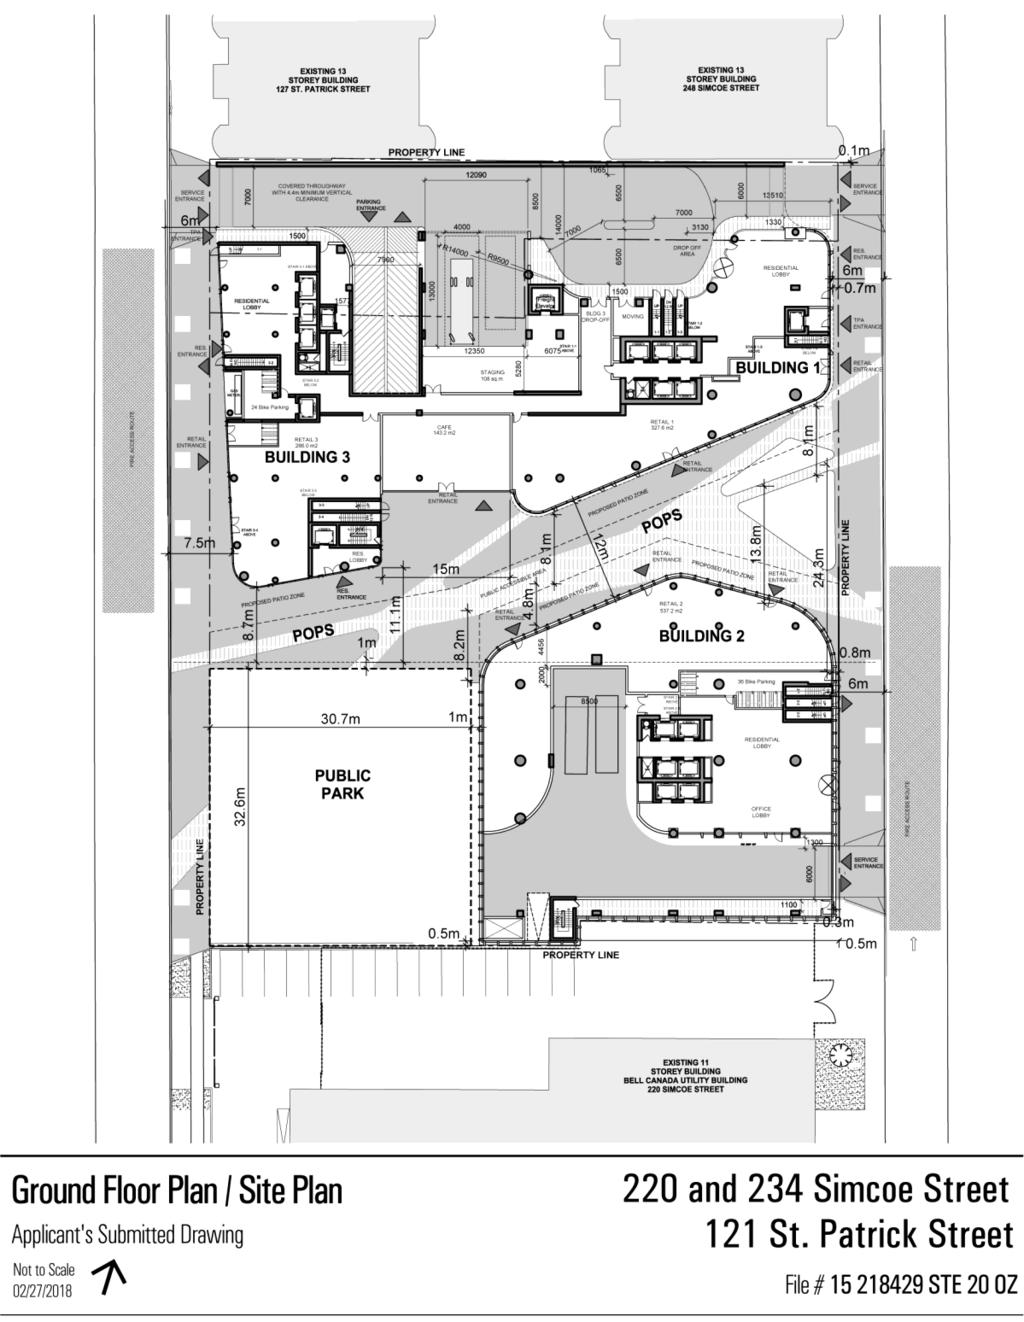 Attachment 1: Ground Floor Plan/Site Plan Staff report for action